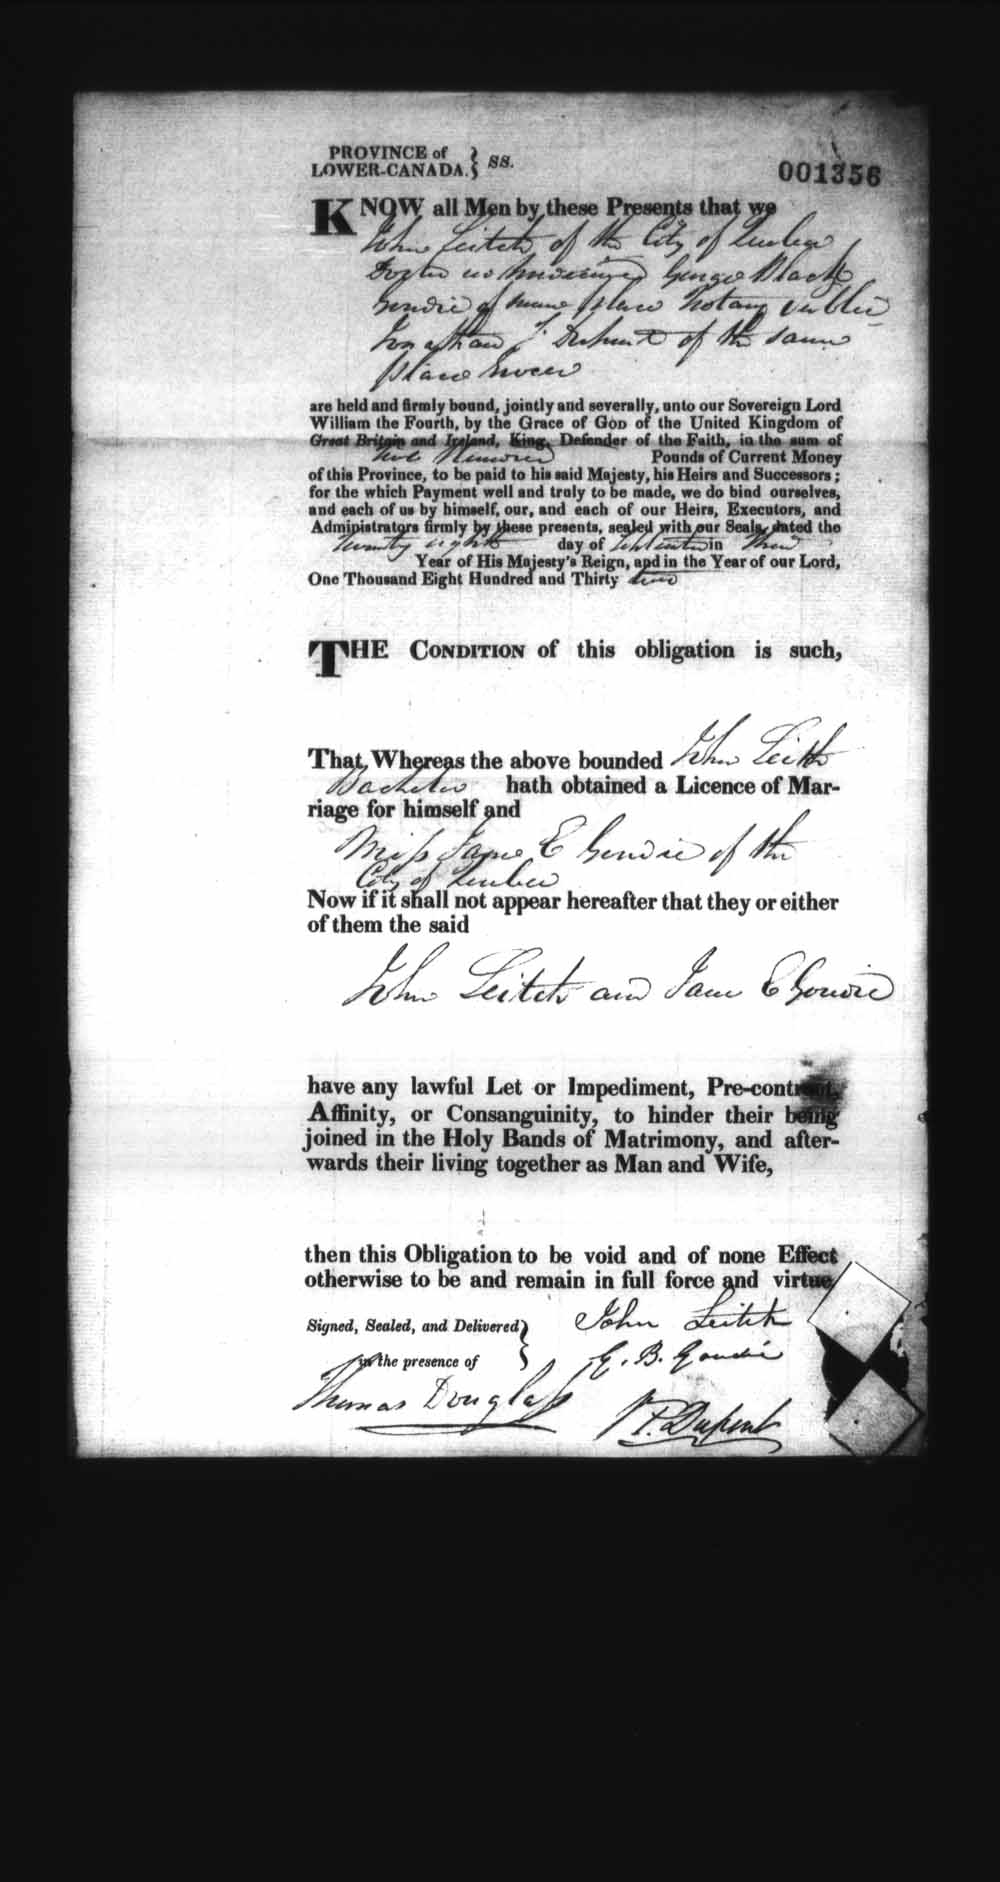 Digitized page of Upper and Lower Canada Marriage Bonds (1779-1865) for Image No.: e008237543